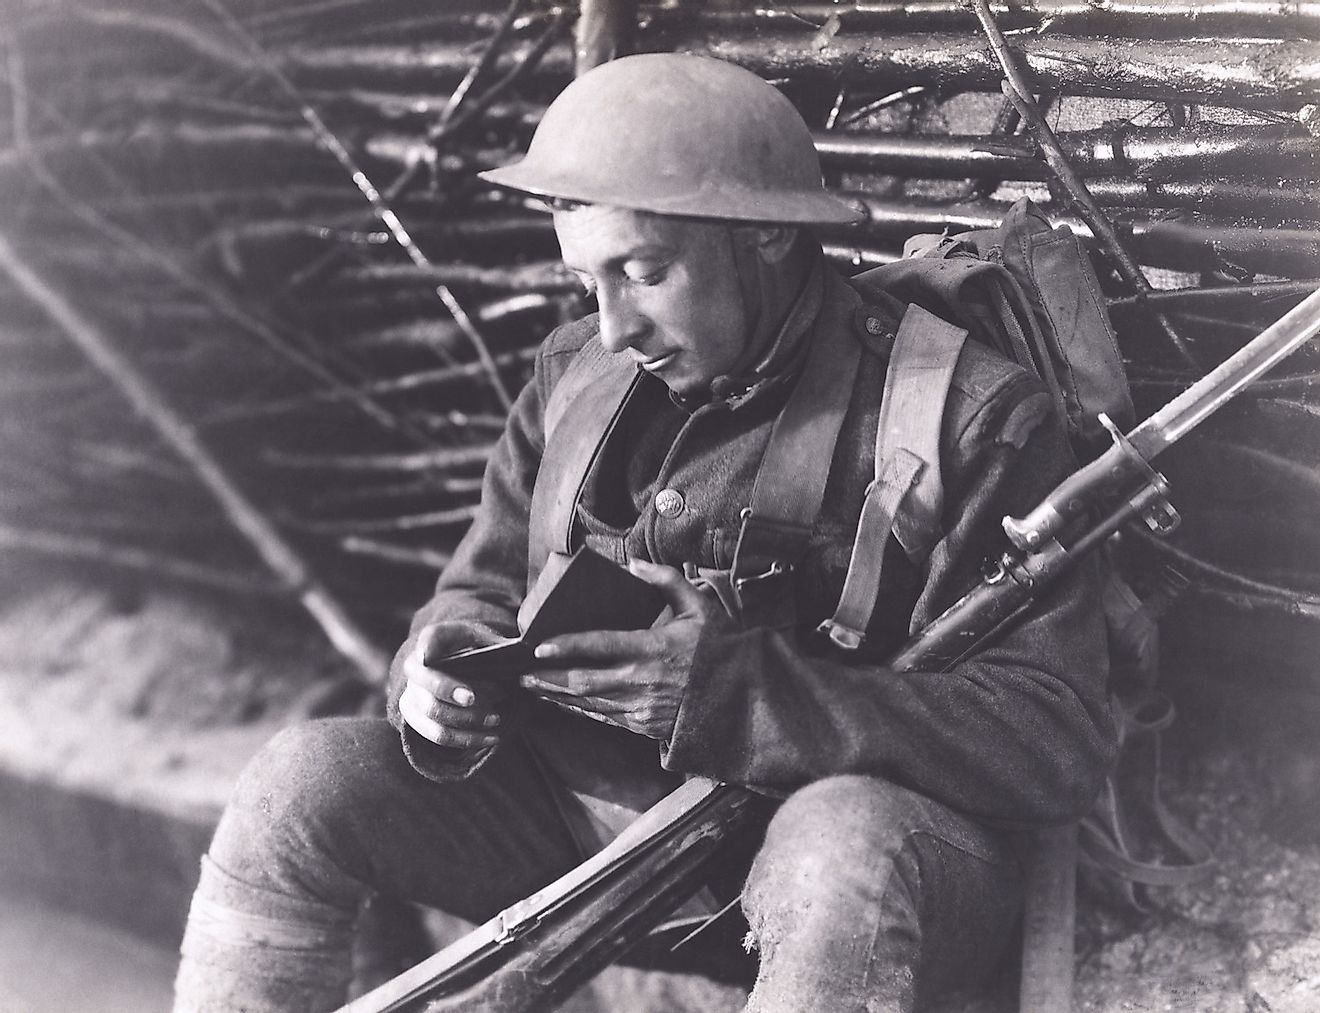 A World War soldier reading a book while posted at the warfront. Image credit: Everett Collection/Shutterstock.com